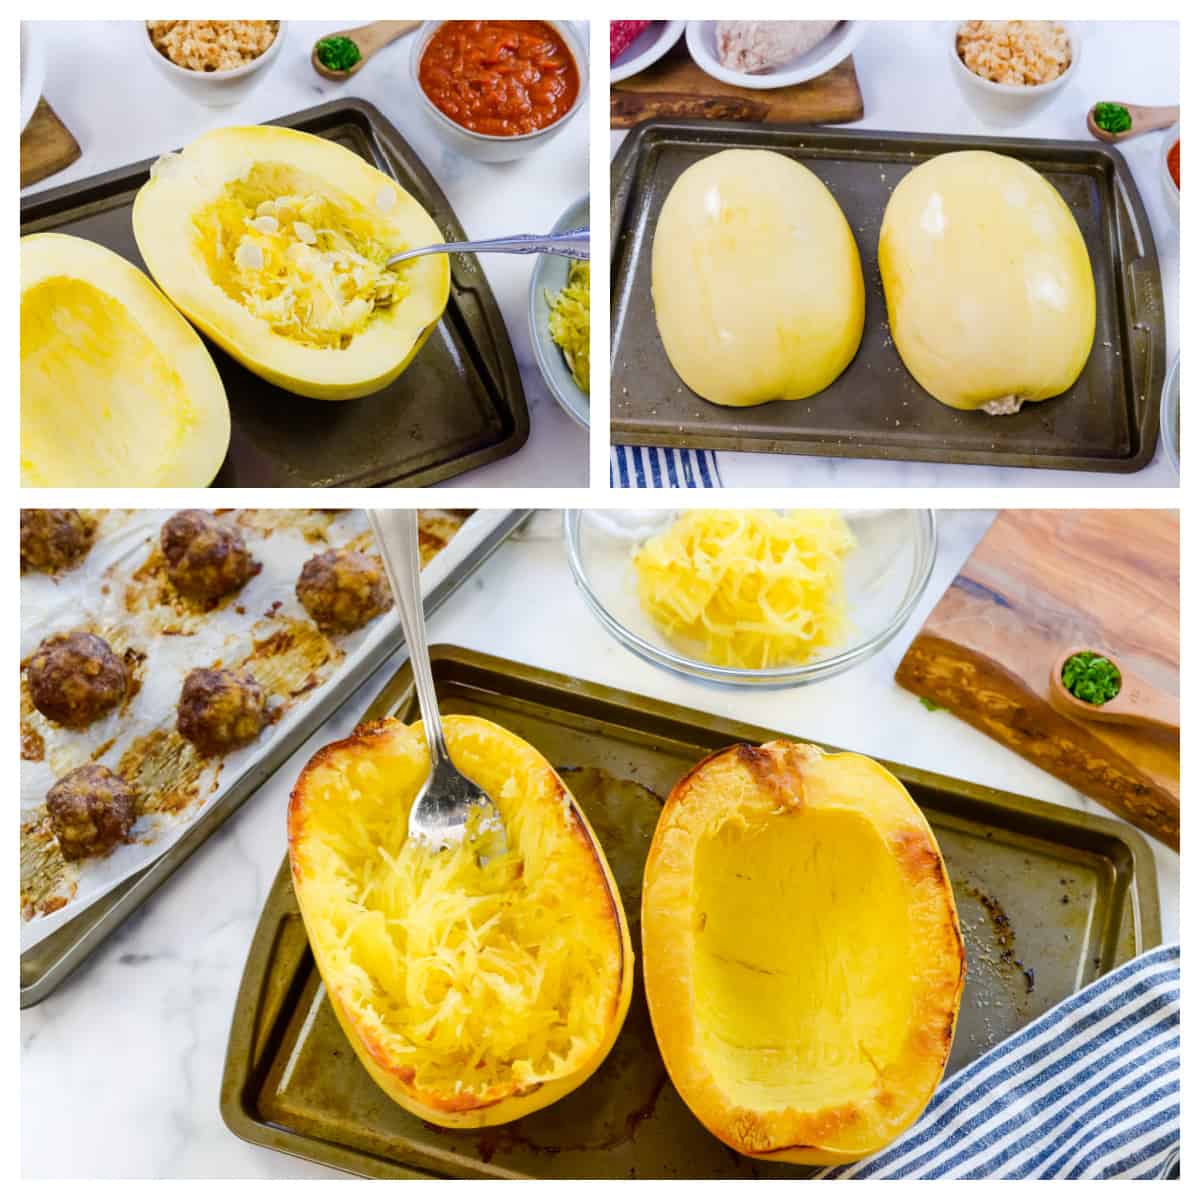 Collage showing how to roast spaghetti squash.